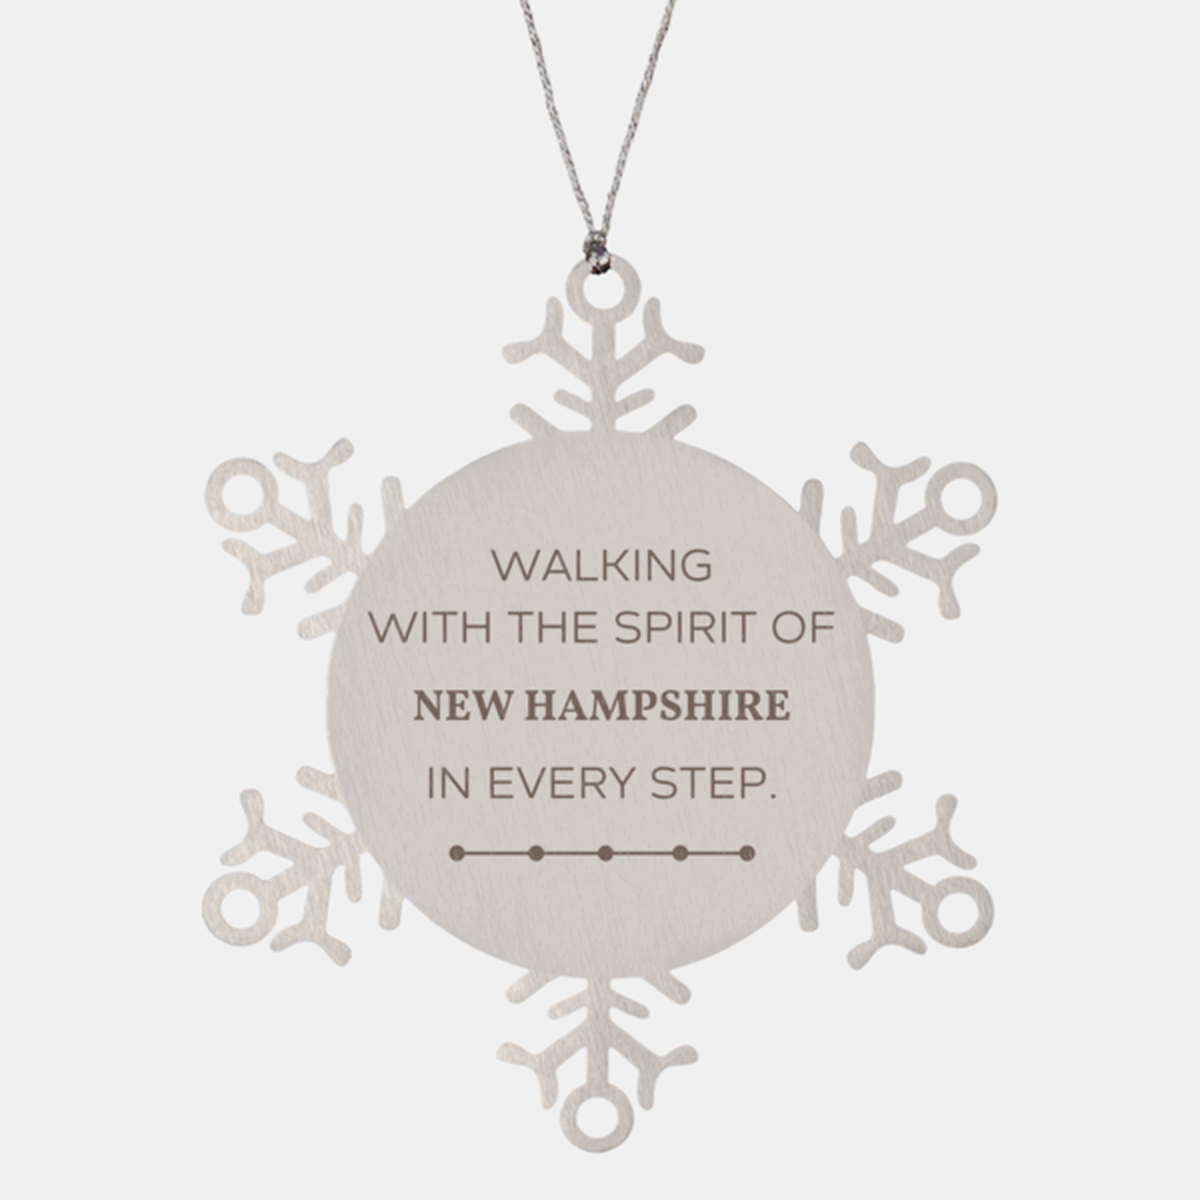 New Hampshire Gifts, Walking with the spirit, Love New Hampshire Birthday Christmas Snowflake Ornament For New Hampshire People, Men, Women, Friends